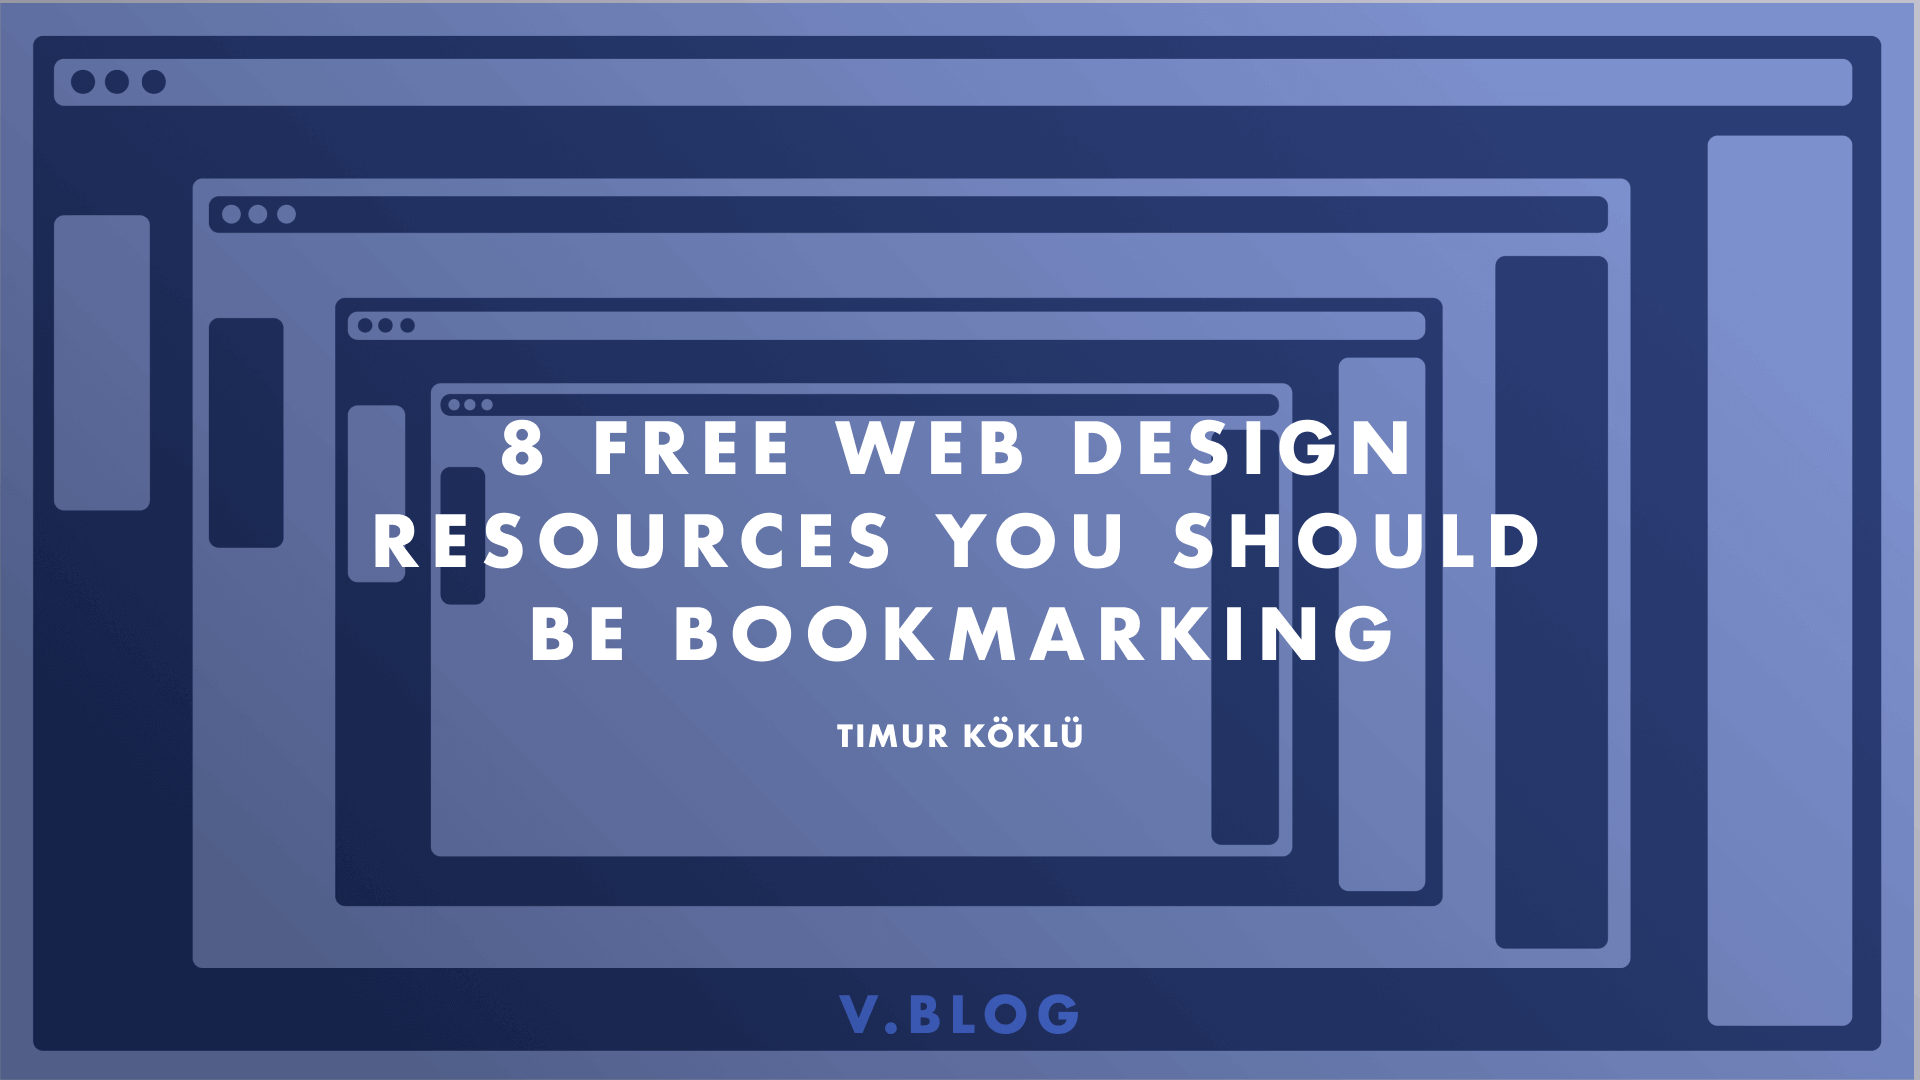 8 free web design resources you should bookmark | Linearity